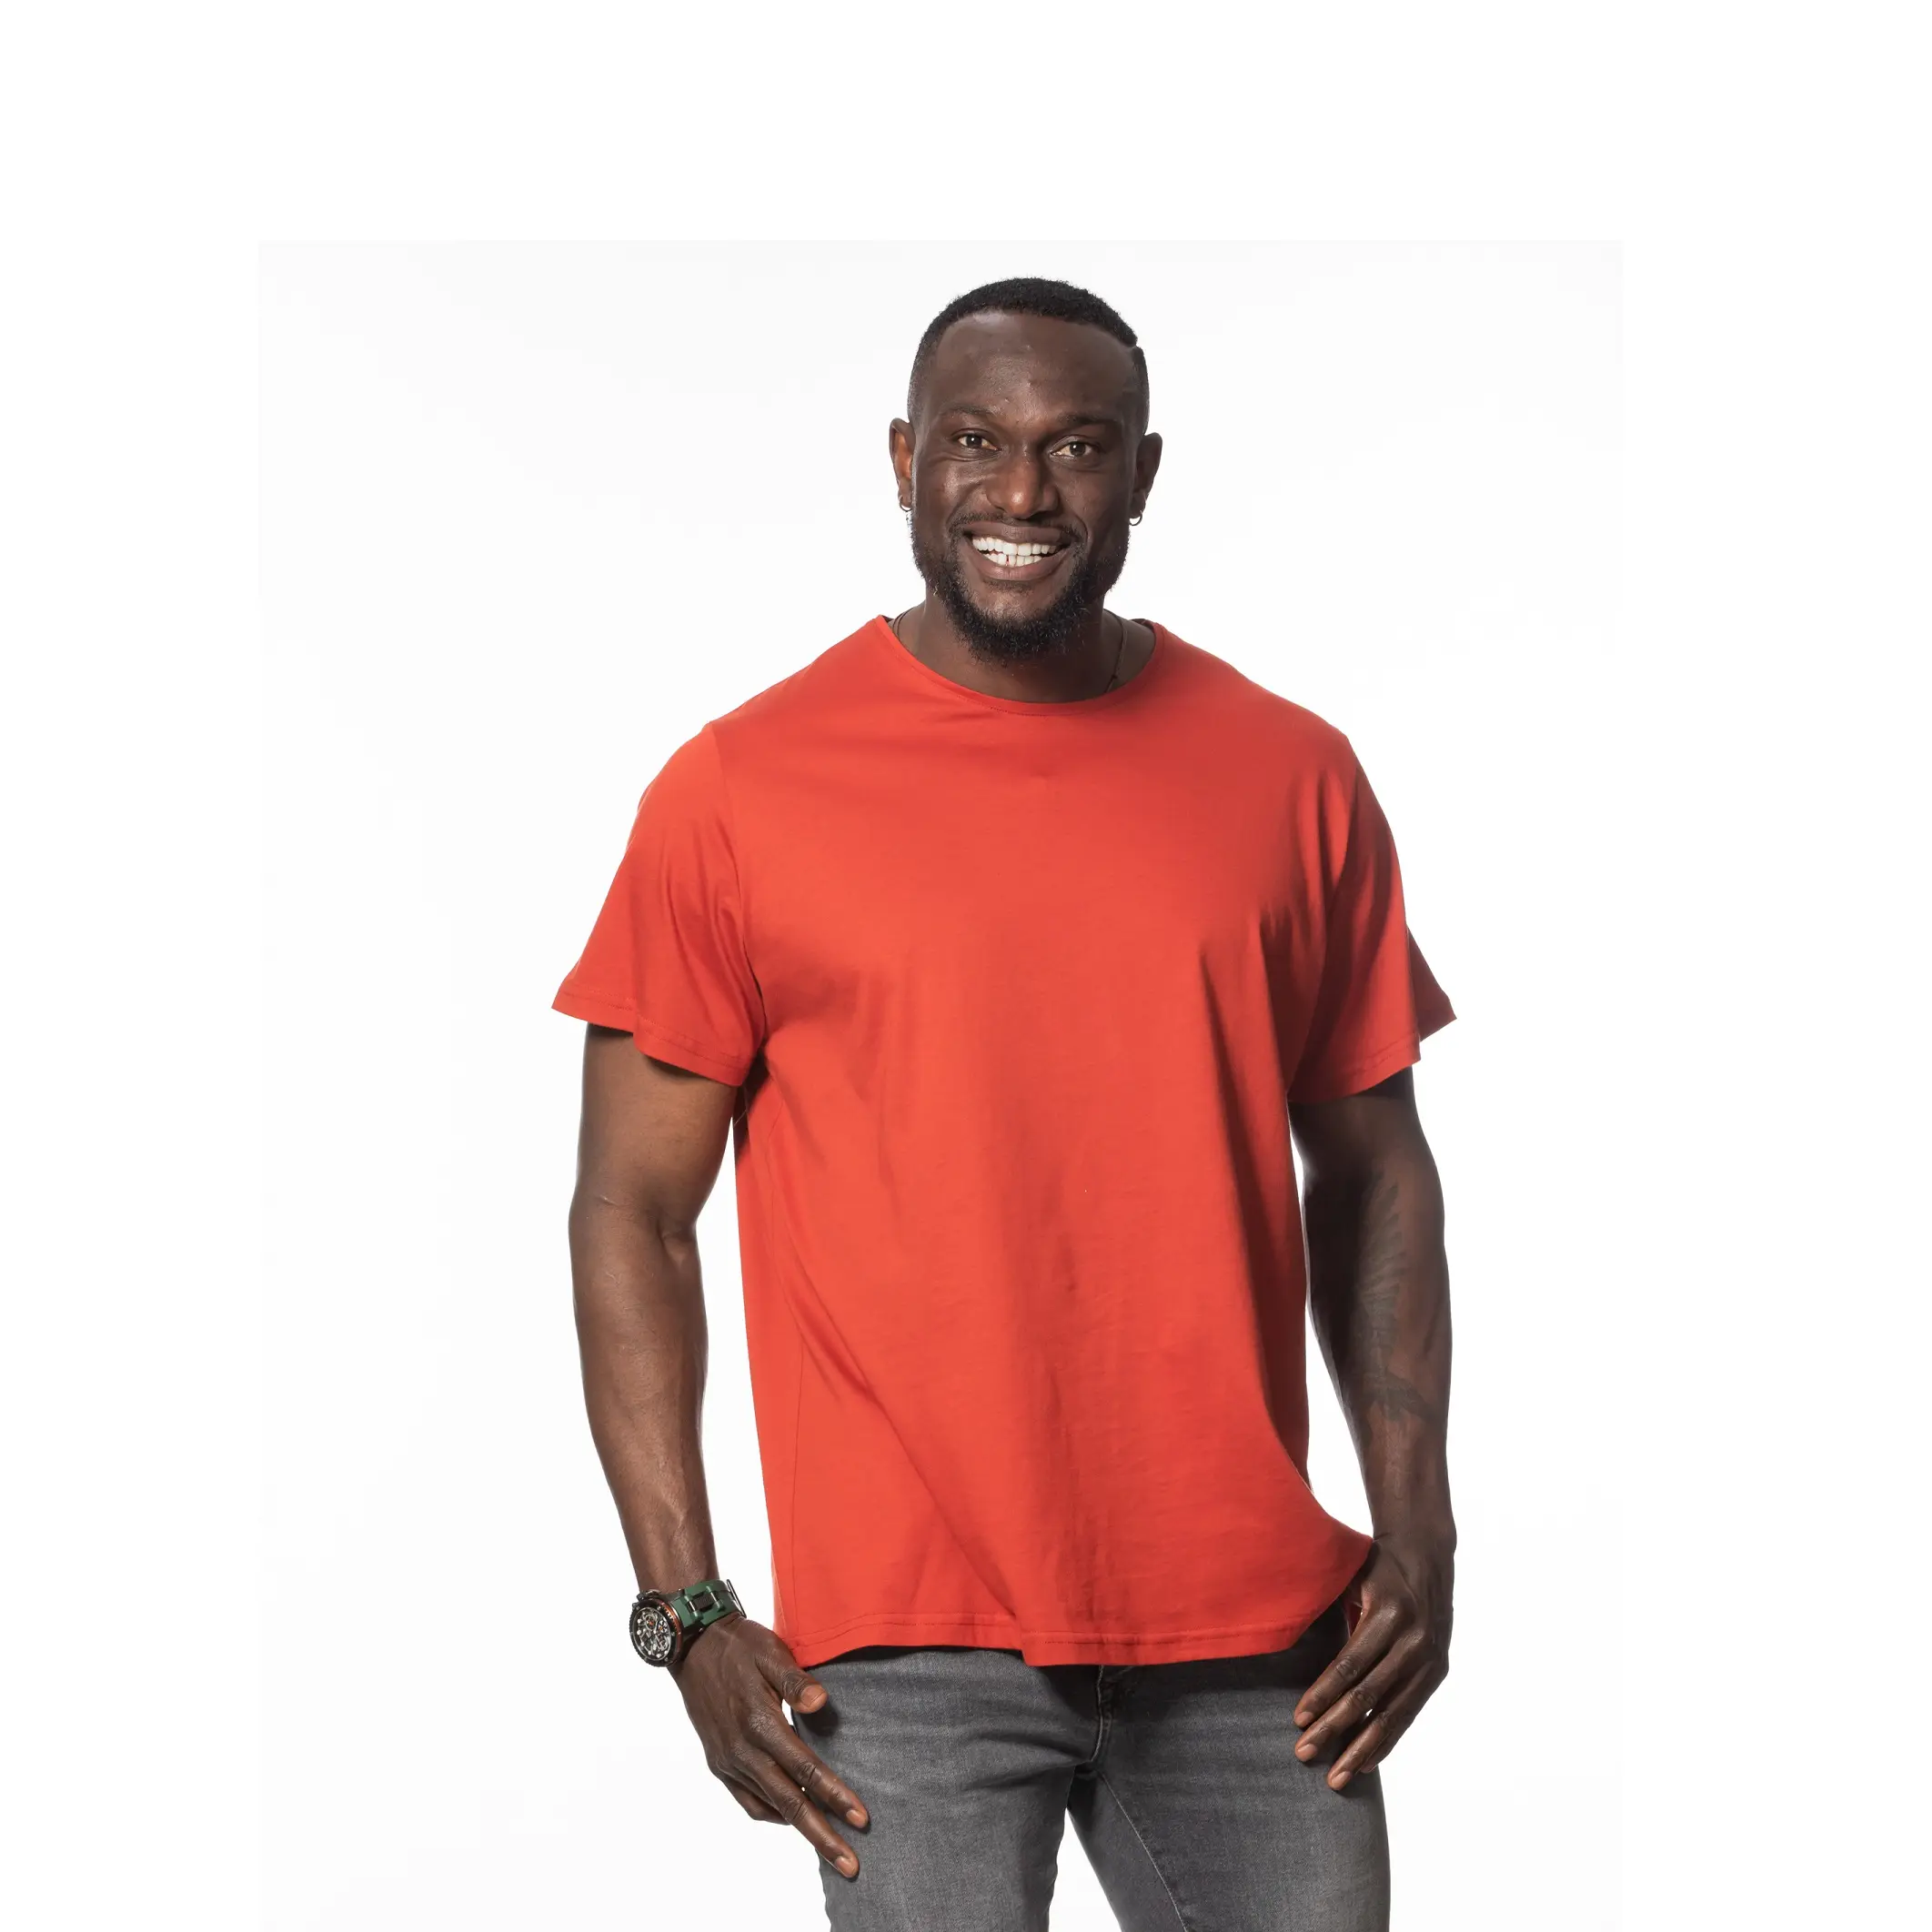 T Shirts for Men 100% Cotton Orange Color Crew Neck - Heavyweight Oversize Premium Quality Made in Turkey